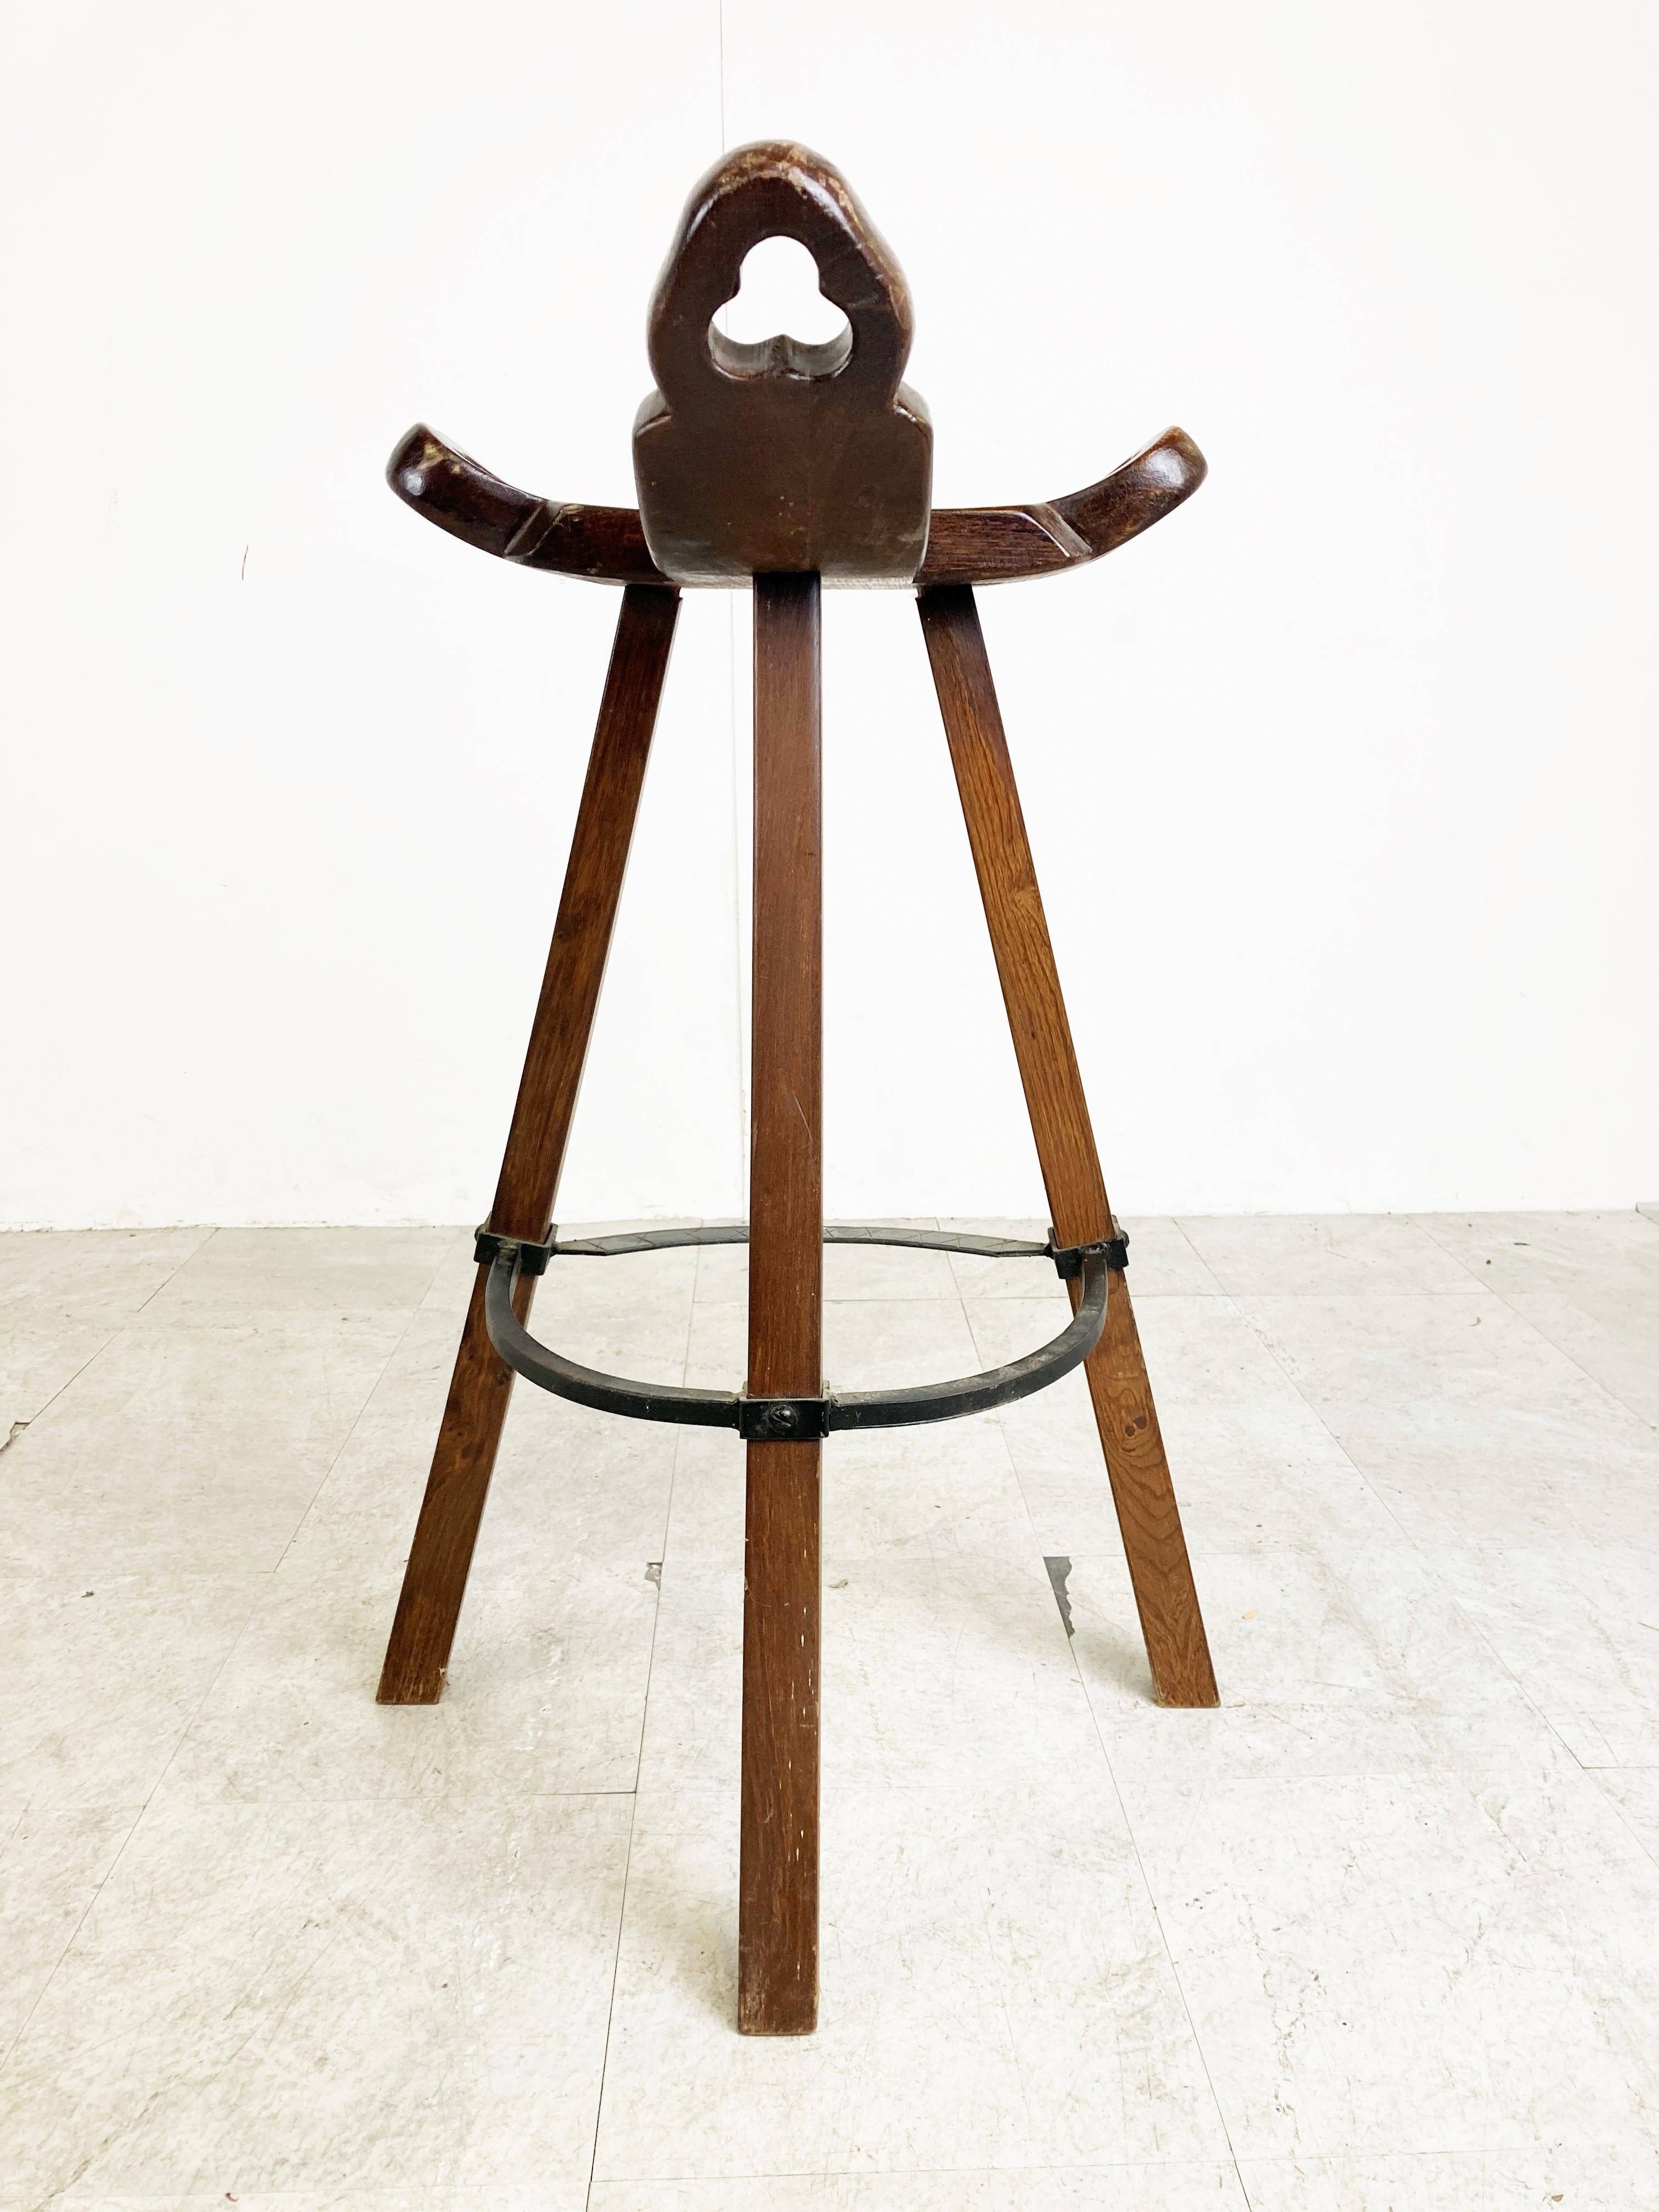 Beautiful hand made mid century tripod bar stools with a steel ring footrest.

Good original condition.

1960s - Spain

Dimensions:
Height: 90cm/35.43